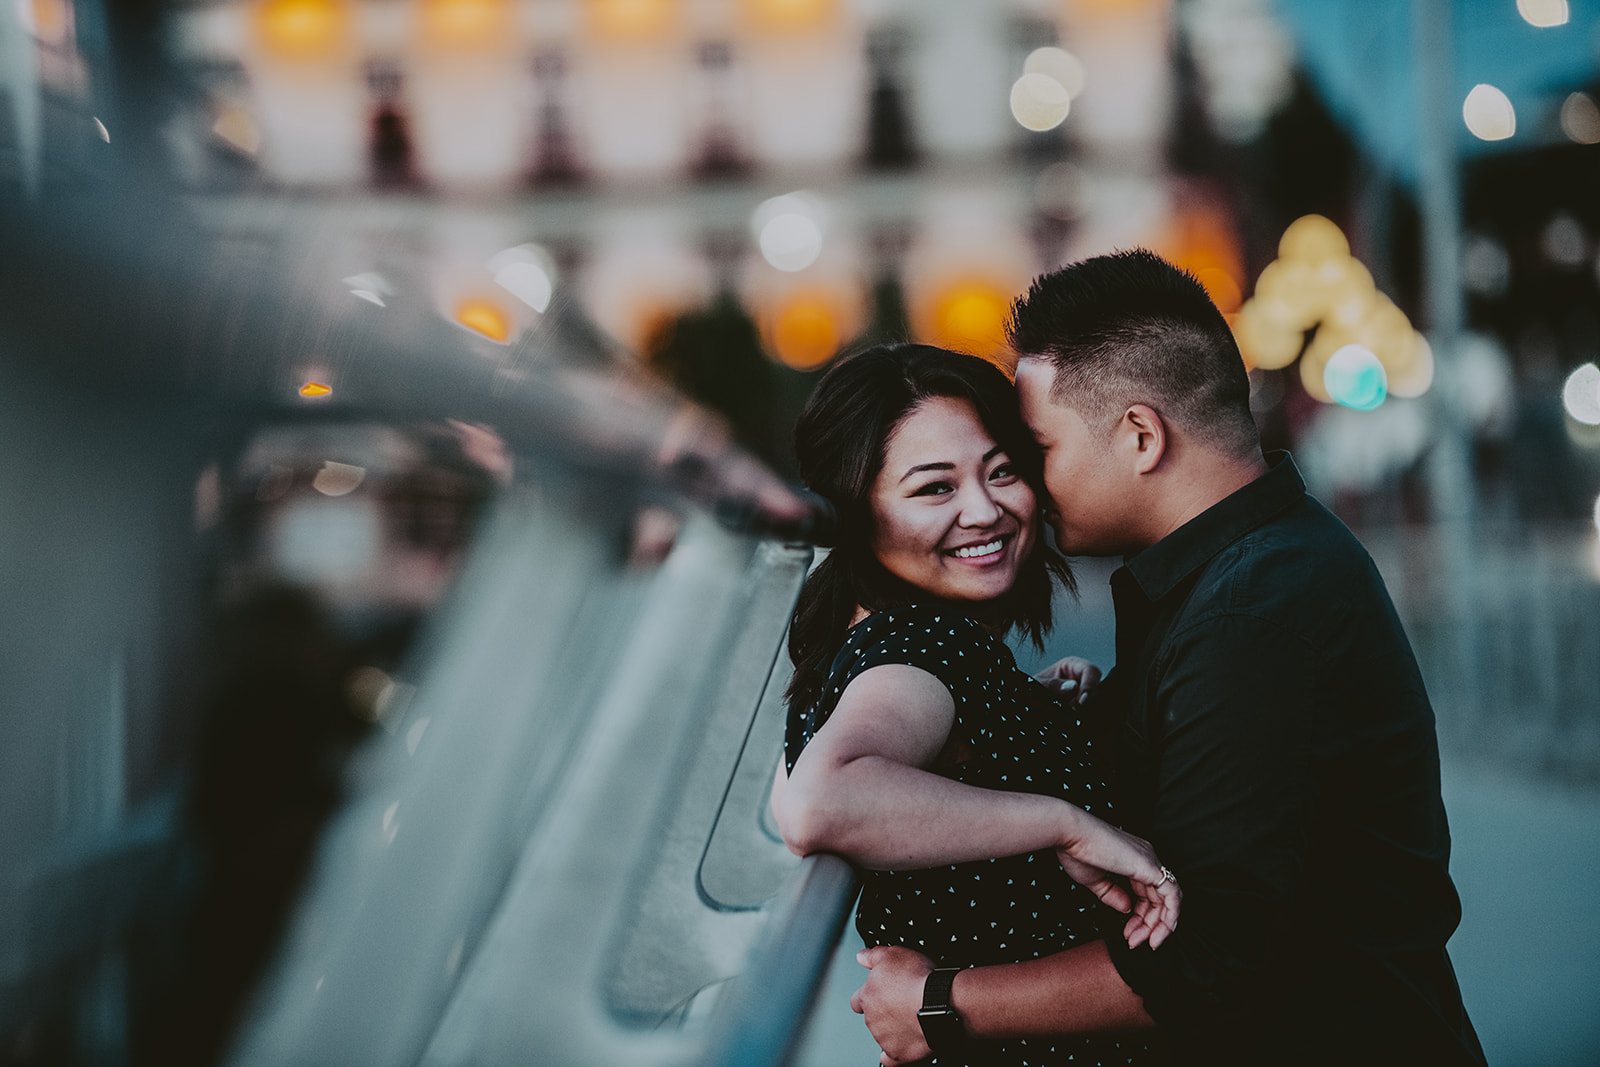 engagement photoshoot by Kelsey Goodwin of KGOODPHOTO